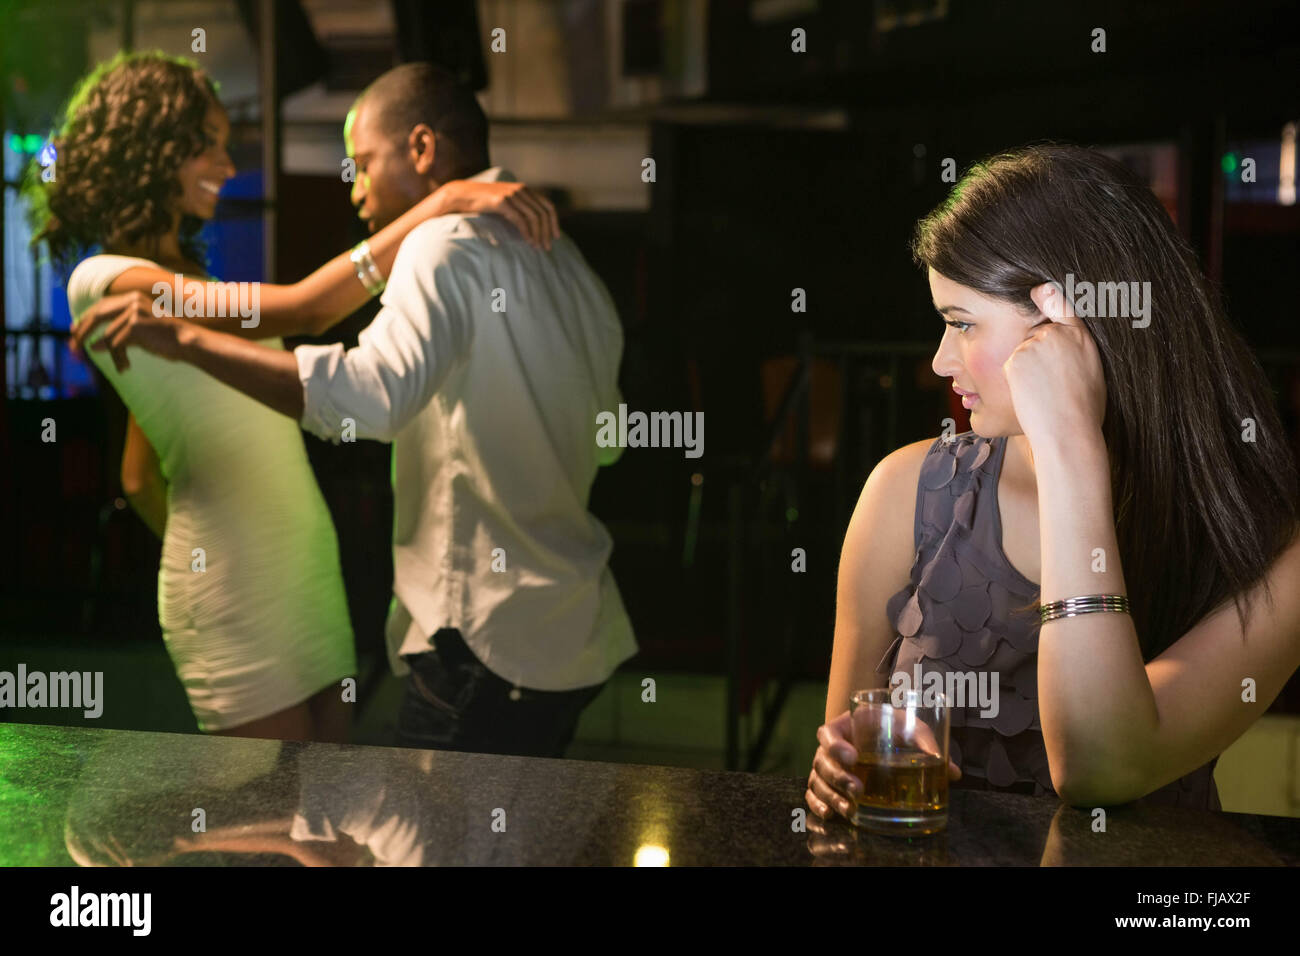 Unhappy woman looking at a couple dancing behind her Stock Photo